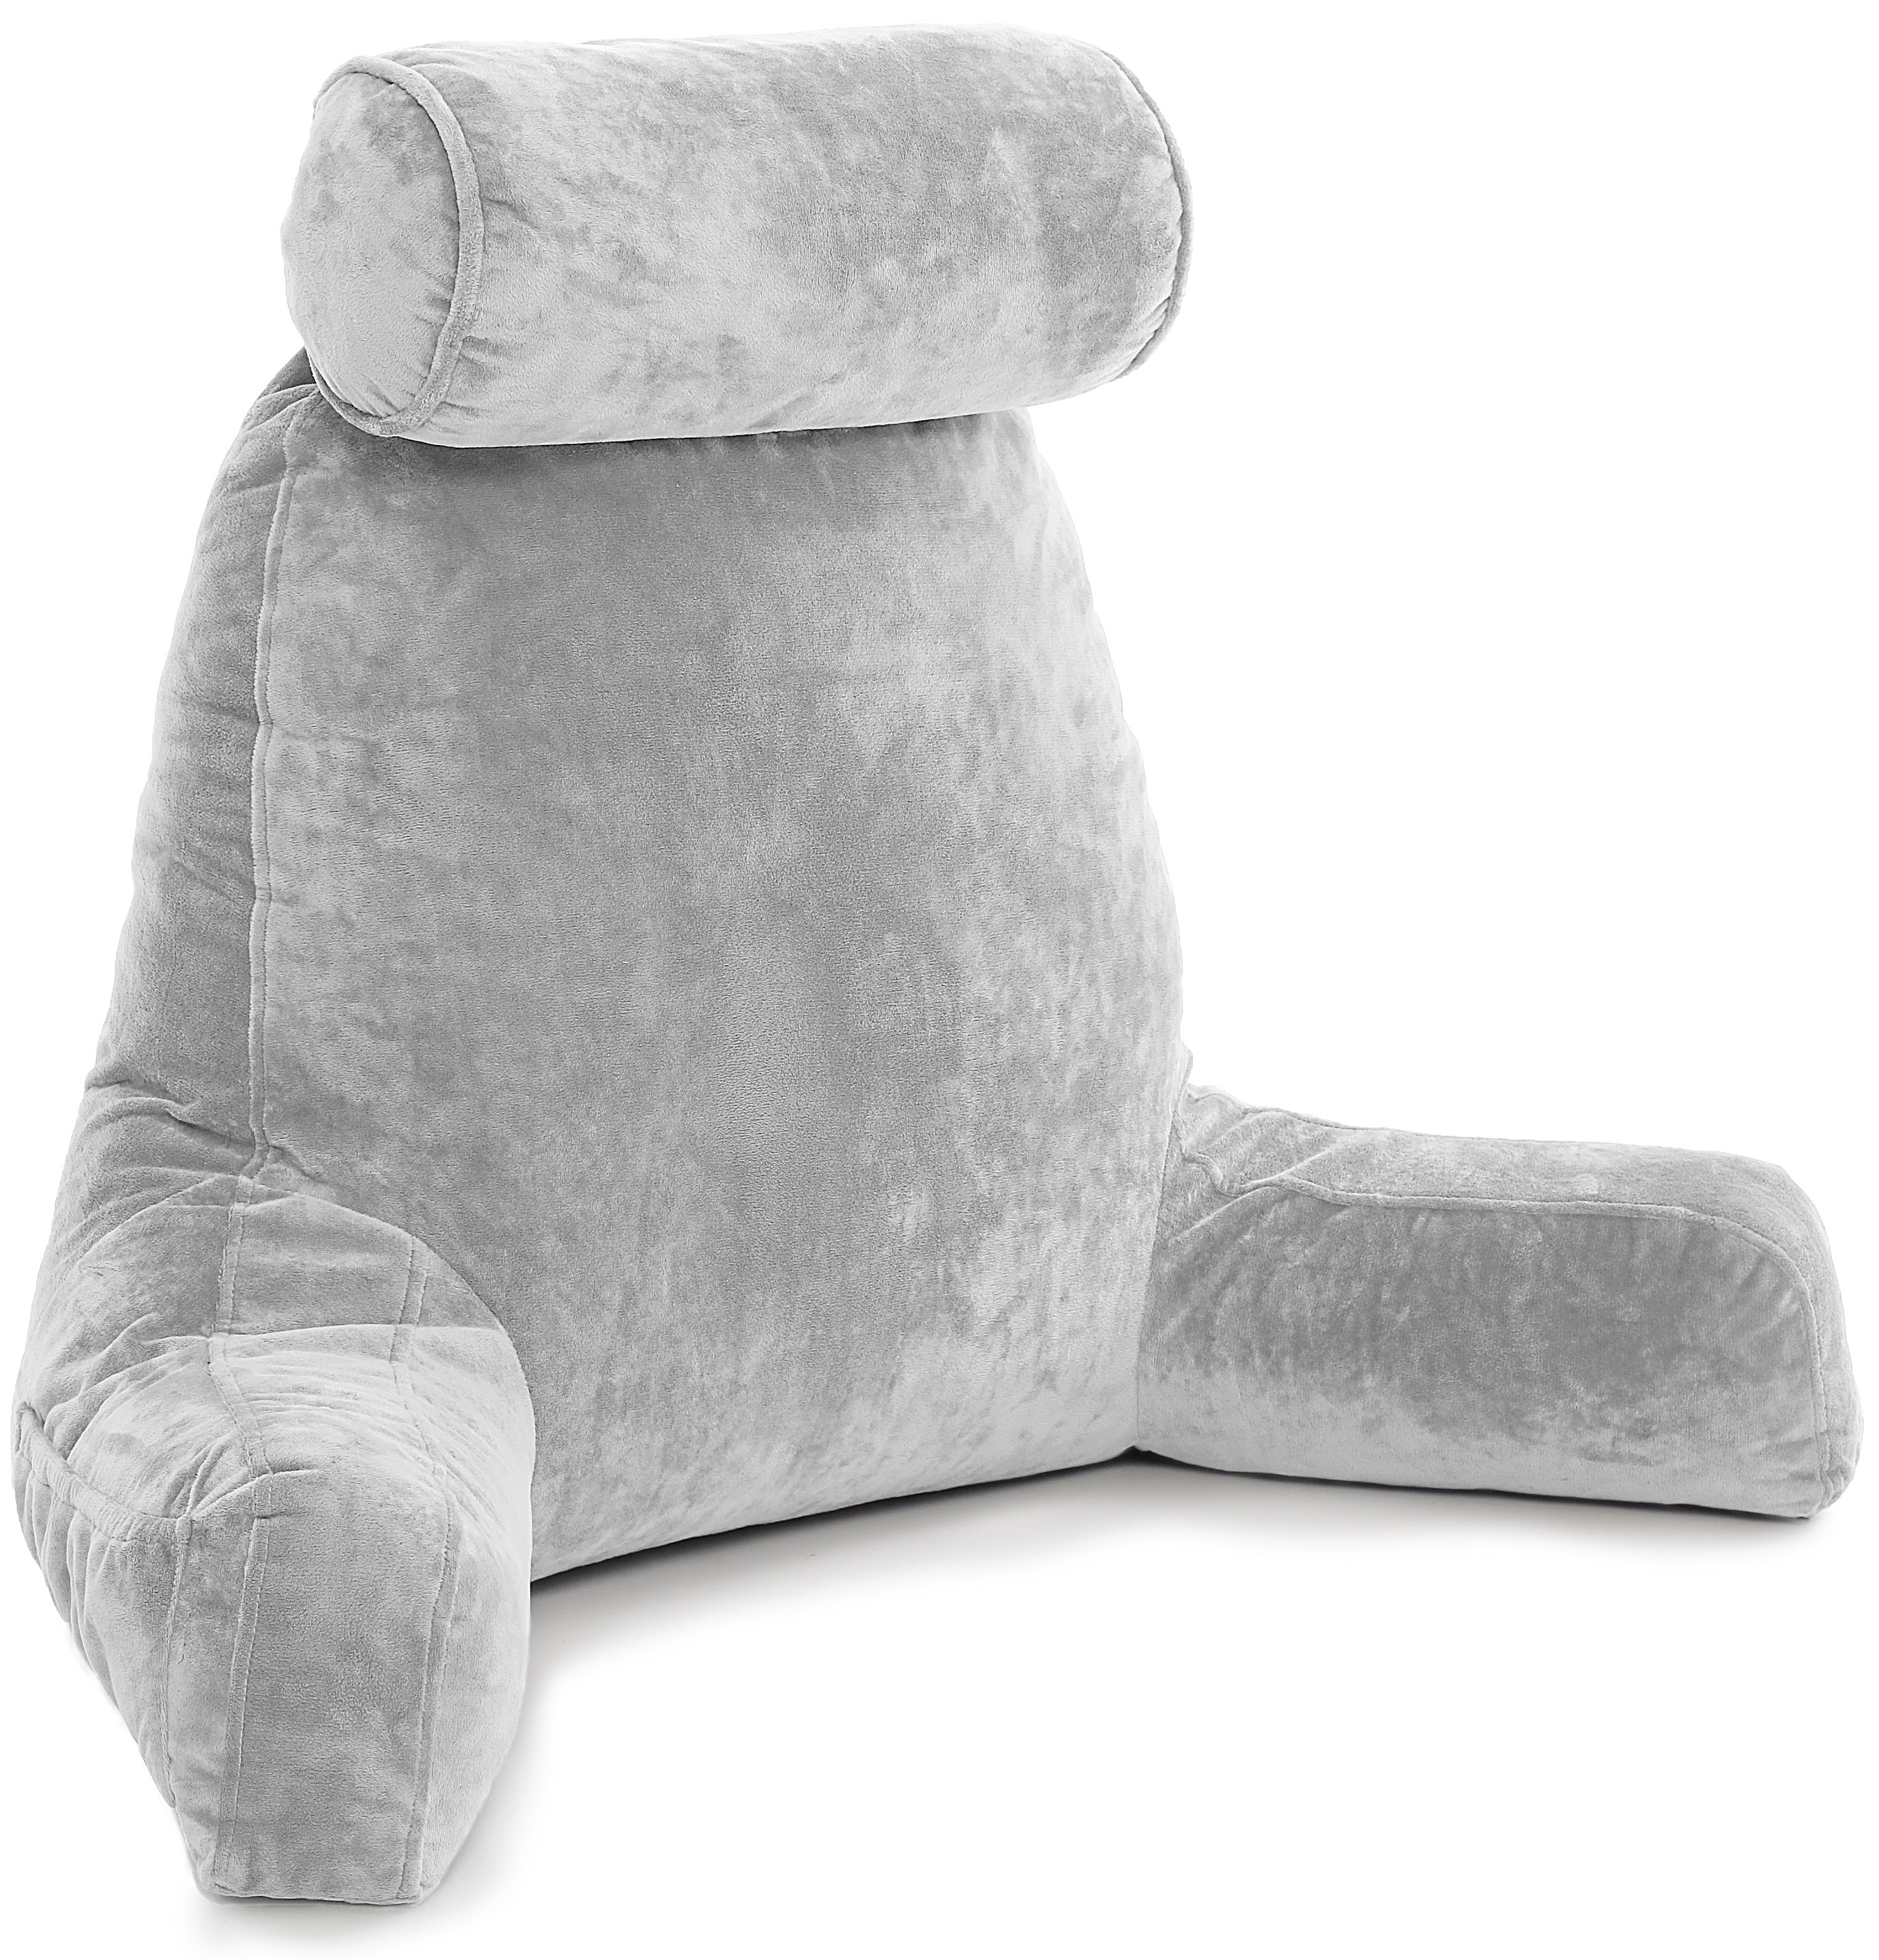 Plush Memory Foam Fill New Best Big Backrest Reading Bed Rest Pillow With Arms